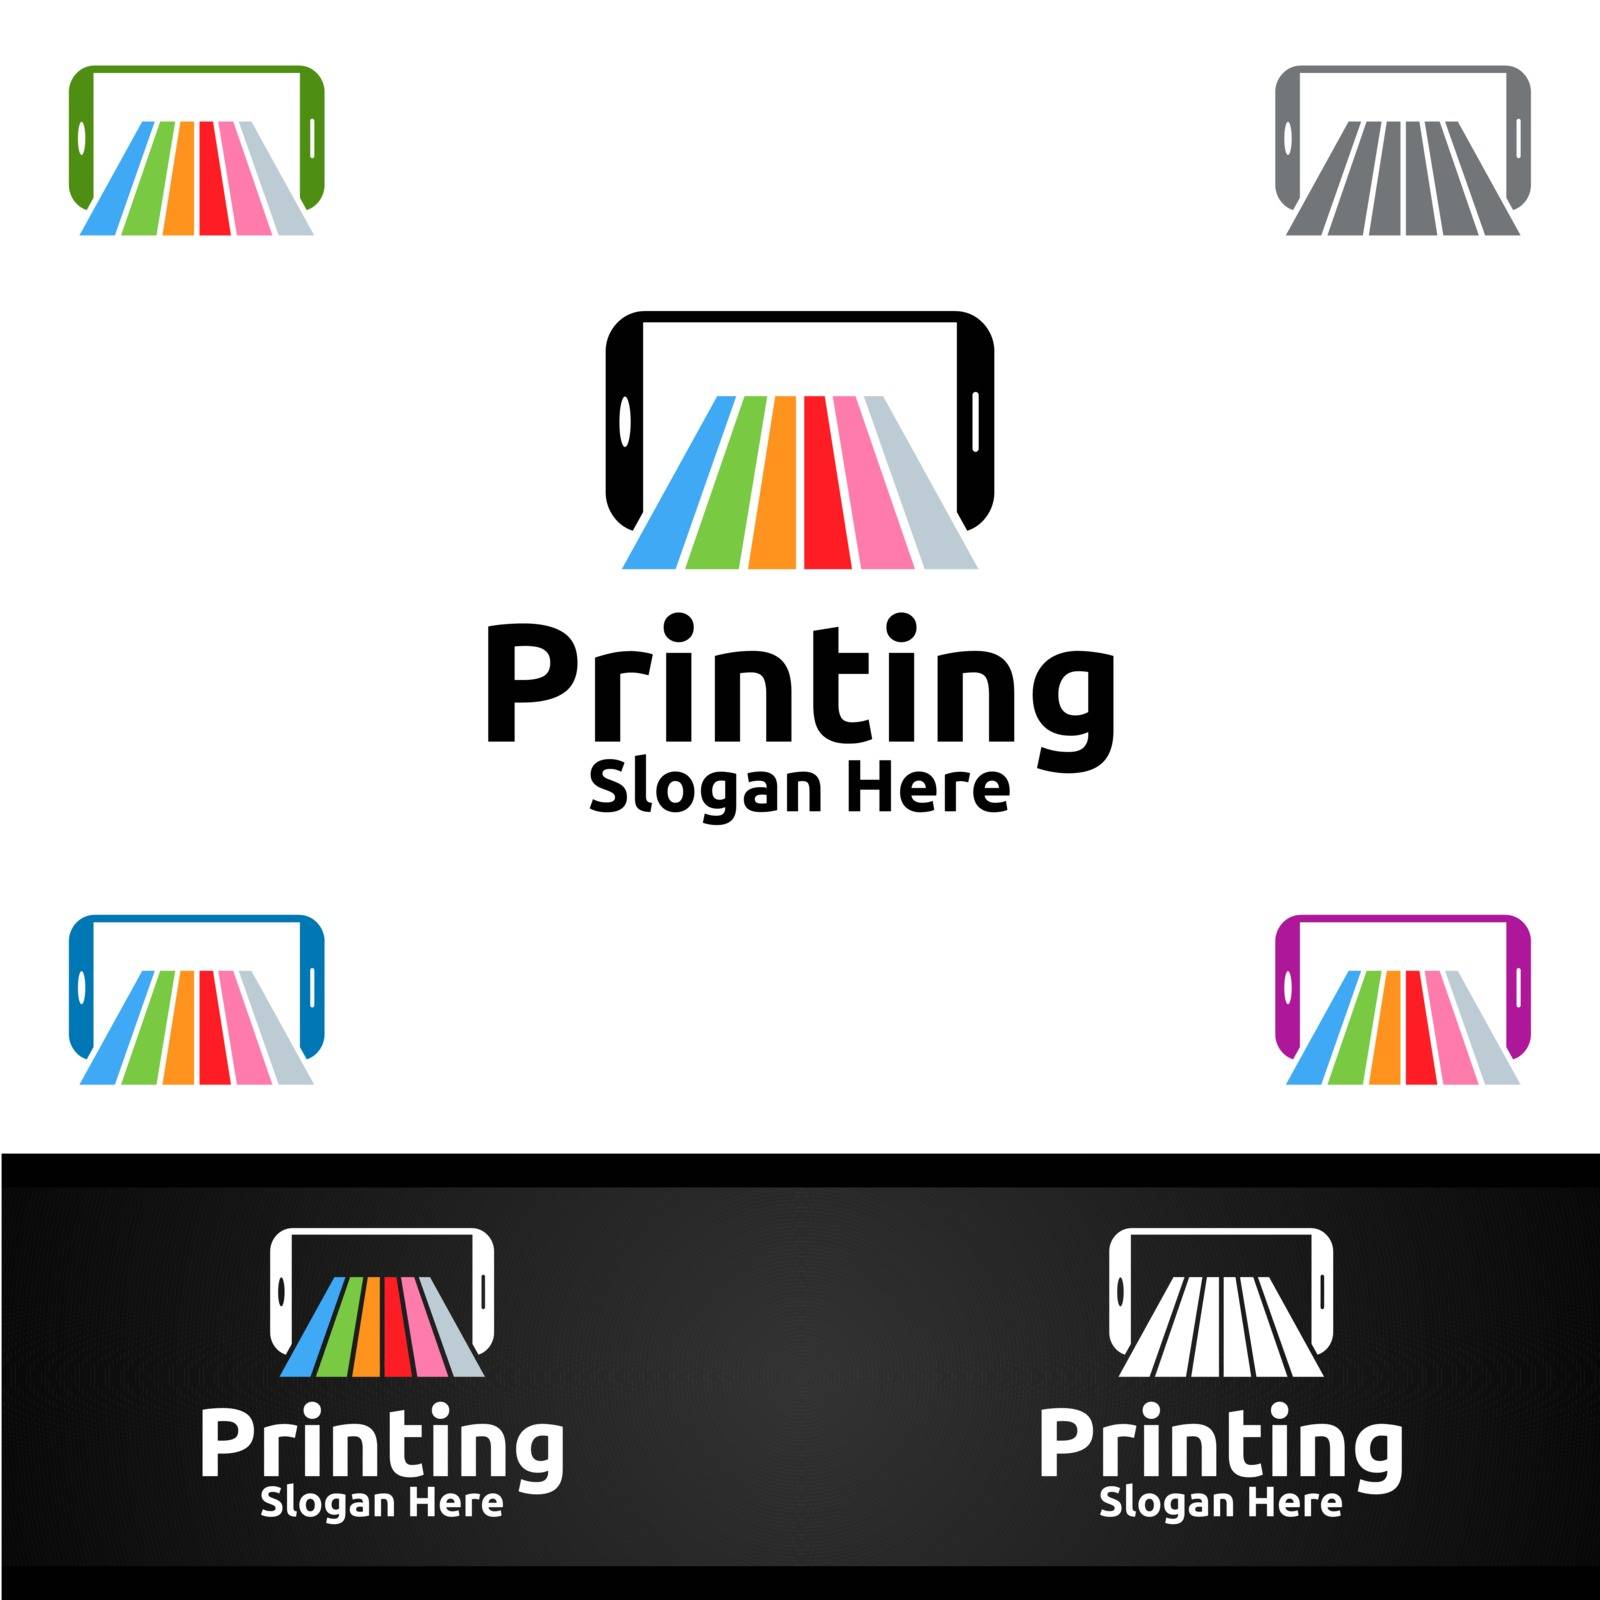 Mobile Printing Company Vector Logo Design for Media, Retail, Advertising, Newspaper or Book Concept by denayuneyi